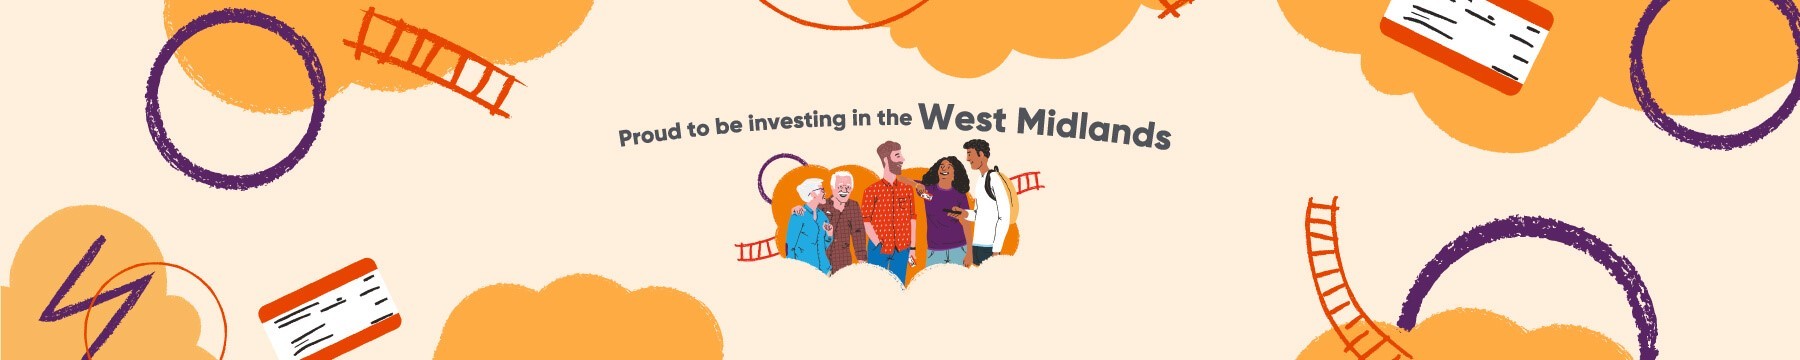 proud to be investing in the west midlands banner